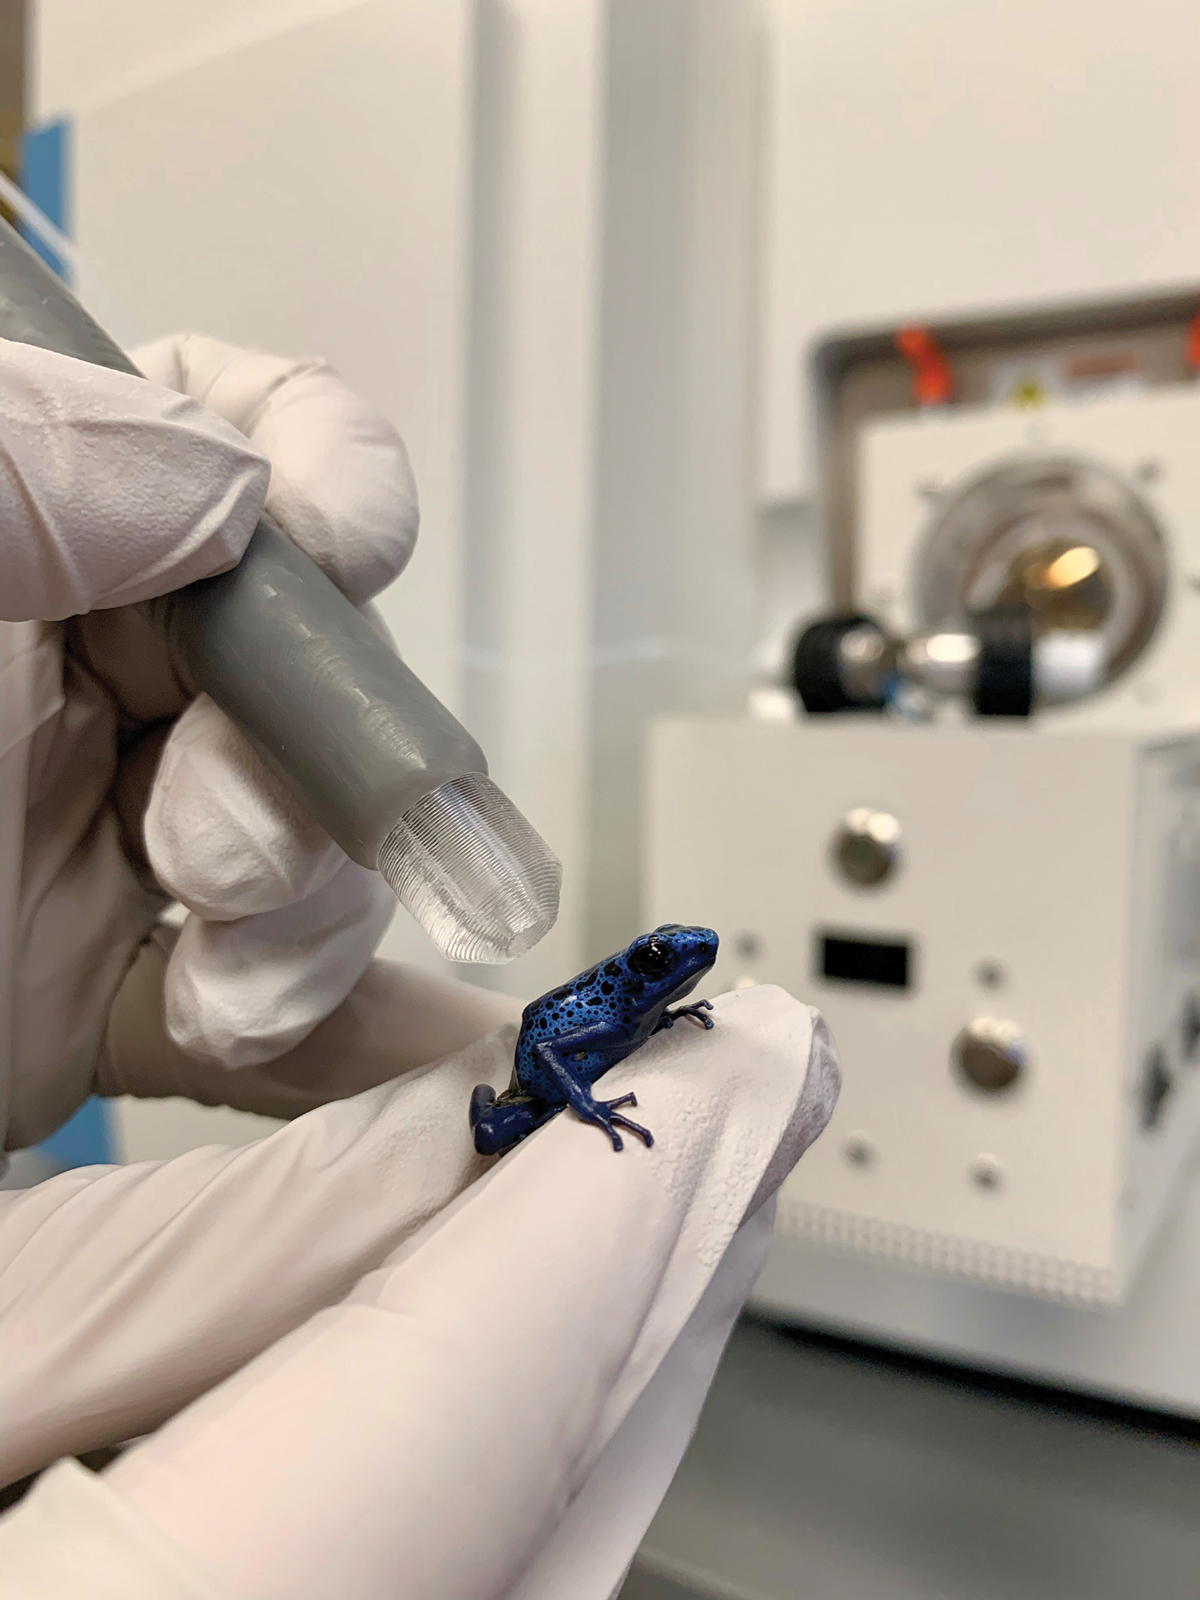 A blue frog sits in a gloved hand as the tip of the mass spectrometry pen approaches it.